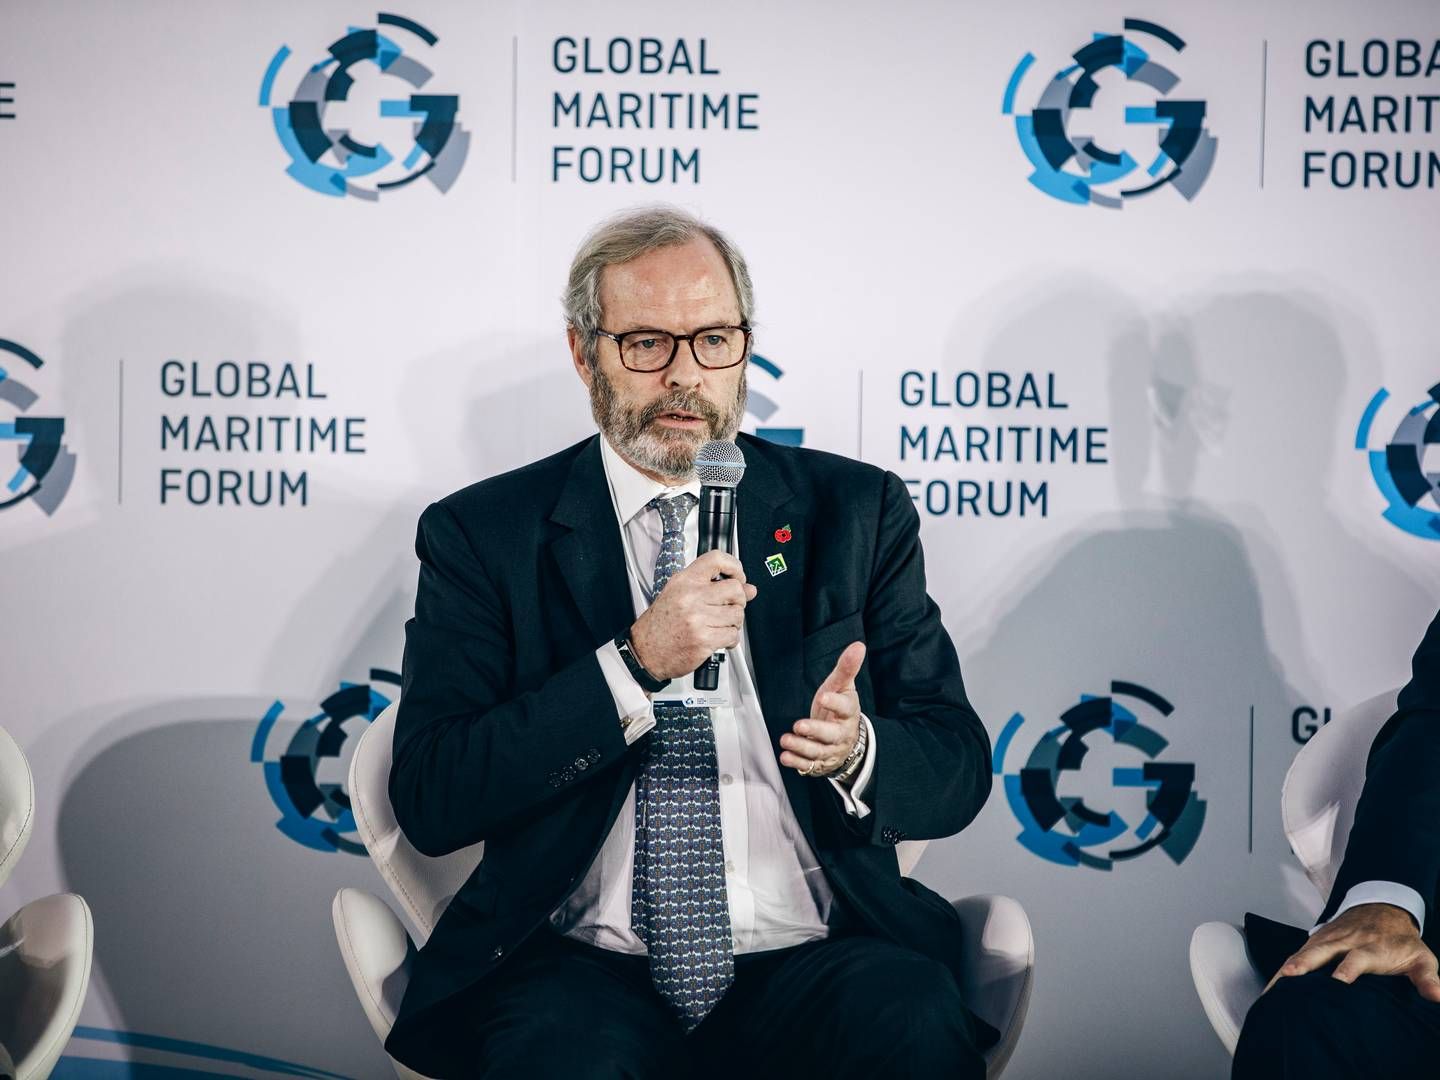 ”Our focus is on working with our clients to help them to a greener, more sustainable mari:me future through the energy transi:on to net zero once the fuels, ships and technology are available at scale,” says Michael Parker, chair of the Poseidon Principles. | Foto: Global Maritime Forum